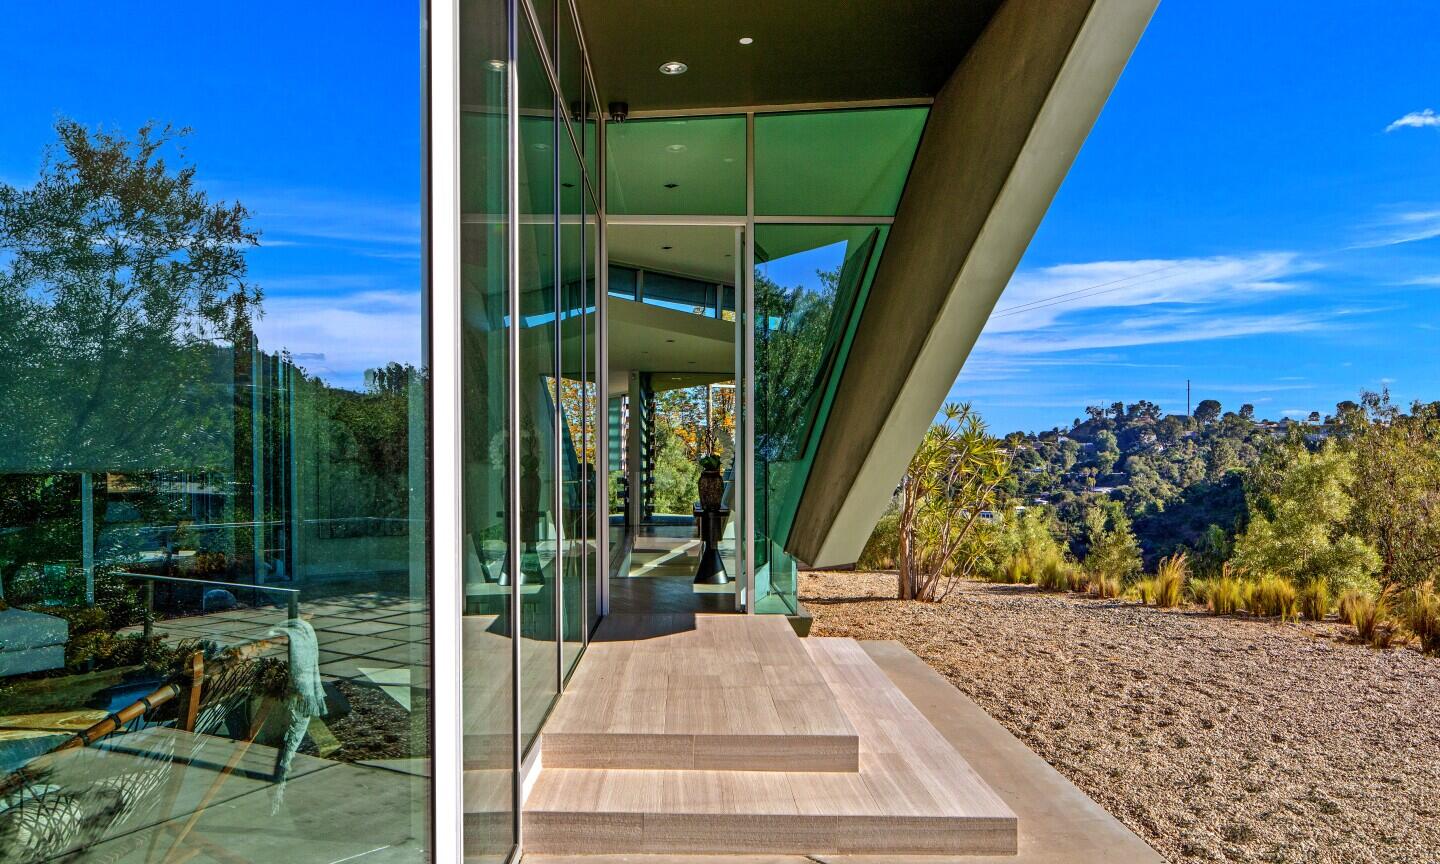 Built by Hagy Belzberg, the striking home crawls across the top of a narrow ridge in Laurel Canyon.